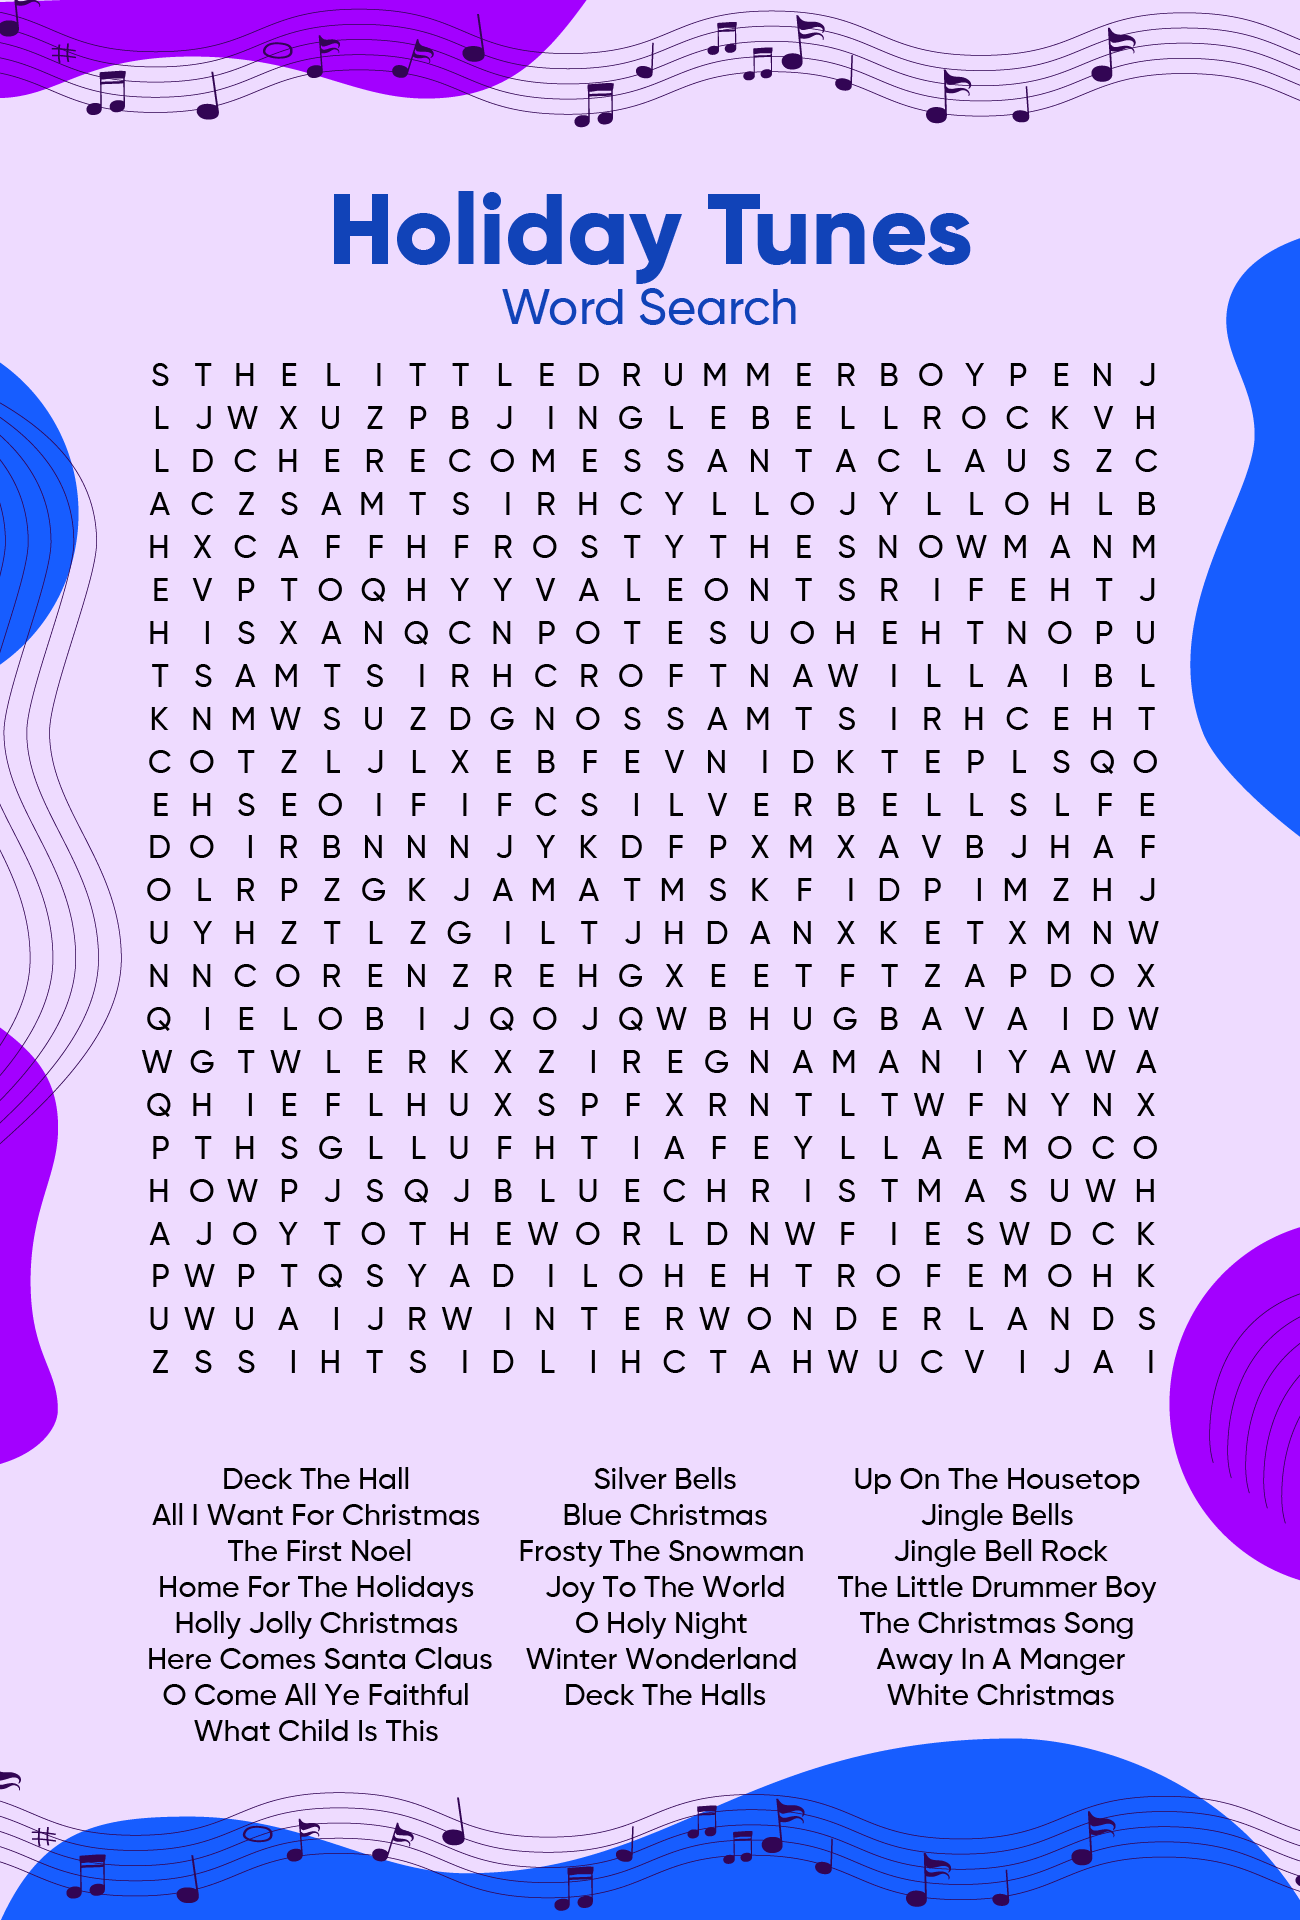 Holiday Tunes Word Search Printable